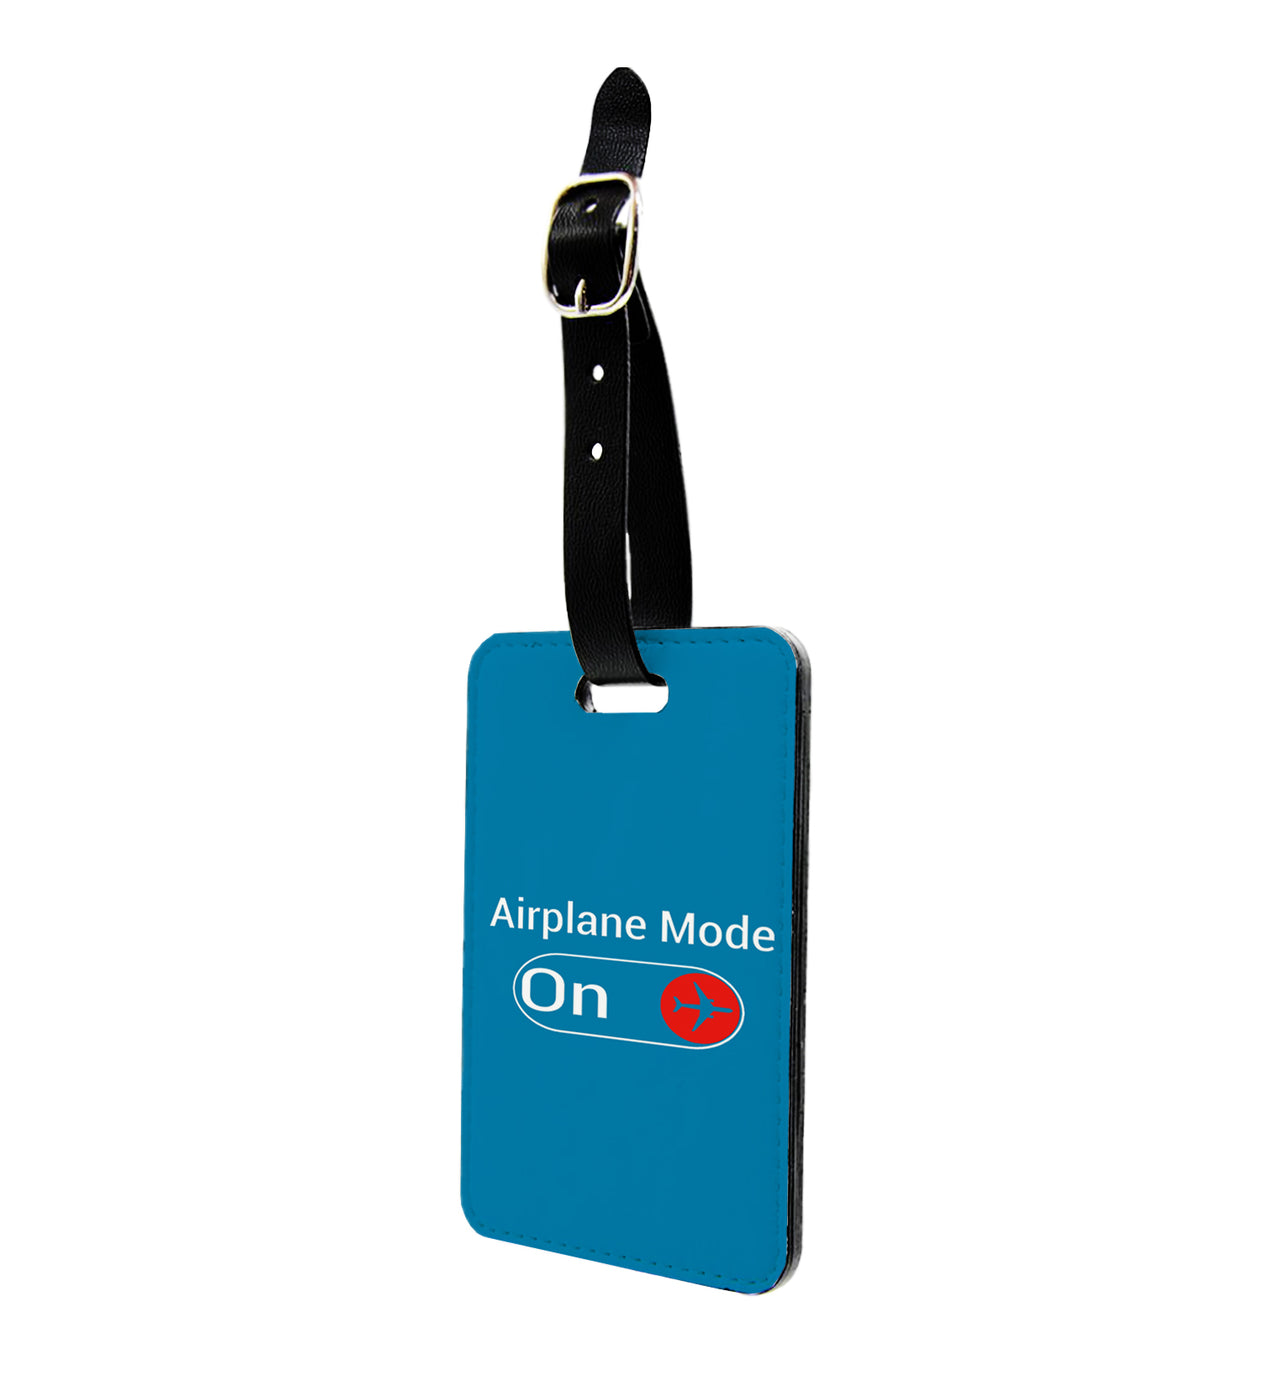 Airplane Mode On Designed Luggage Tag